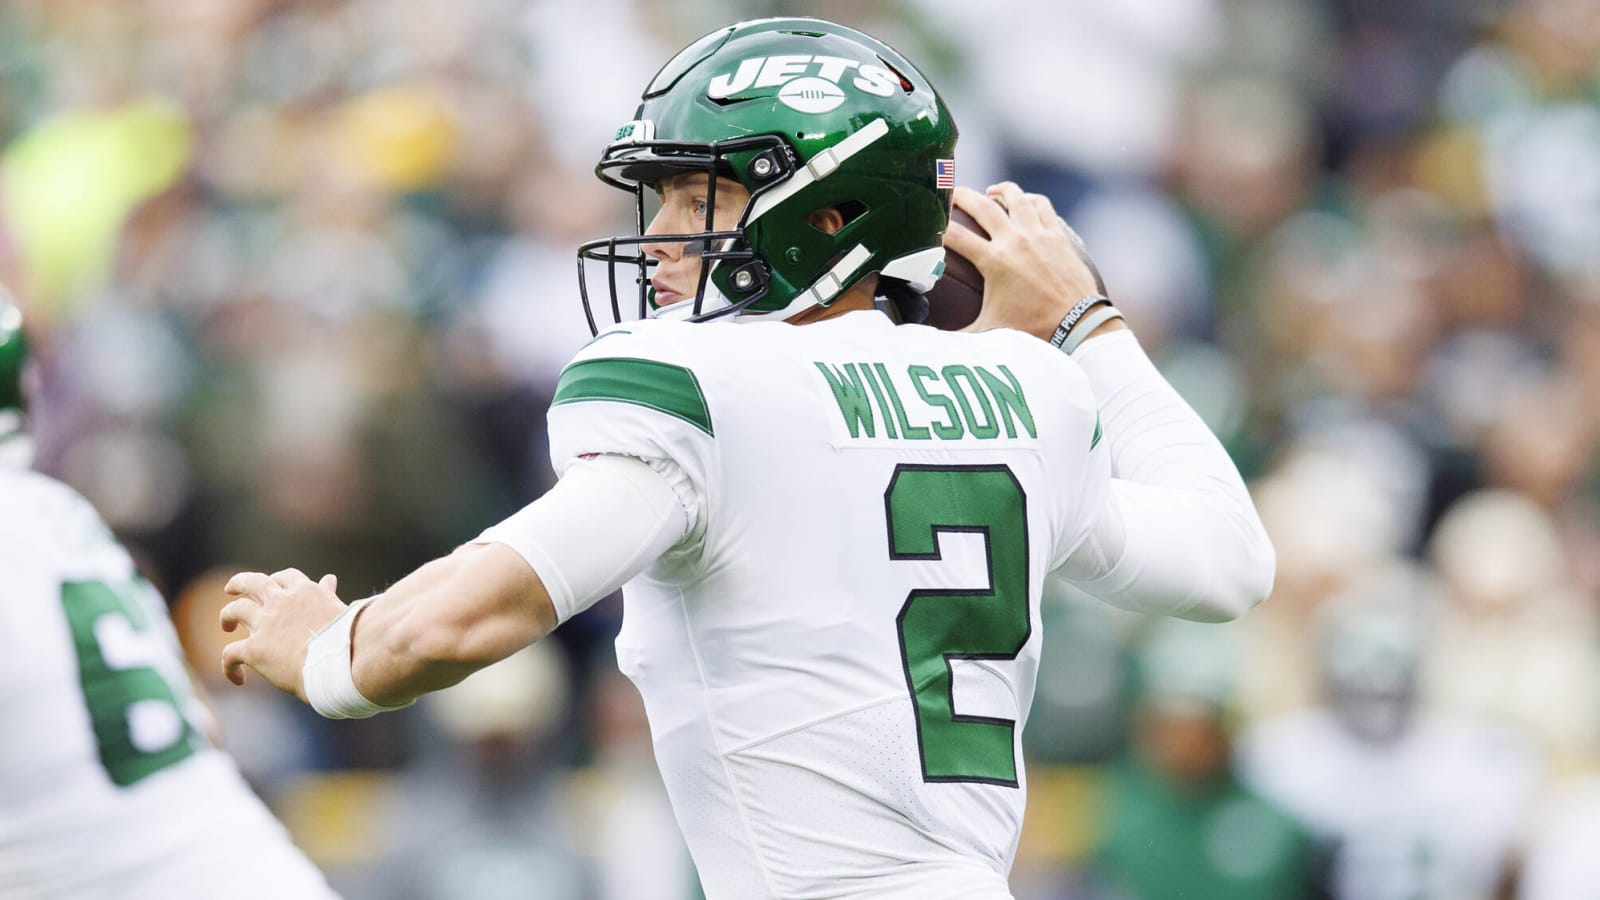 Jets QB Zach Wilson 1 of 2 players with passing, rushing and receiving TDs